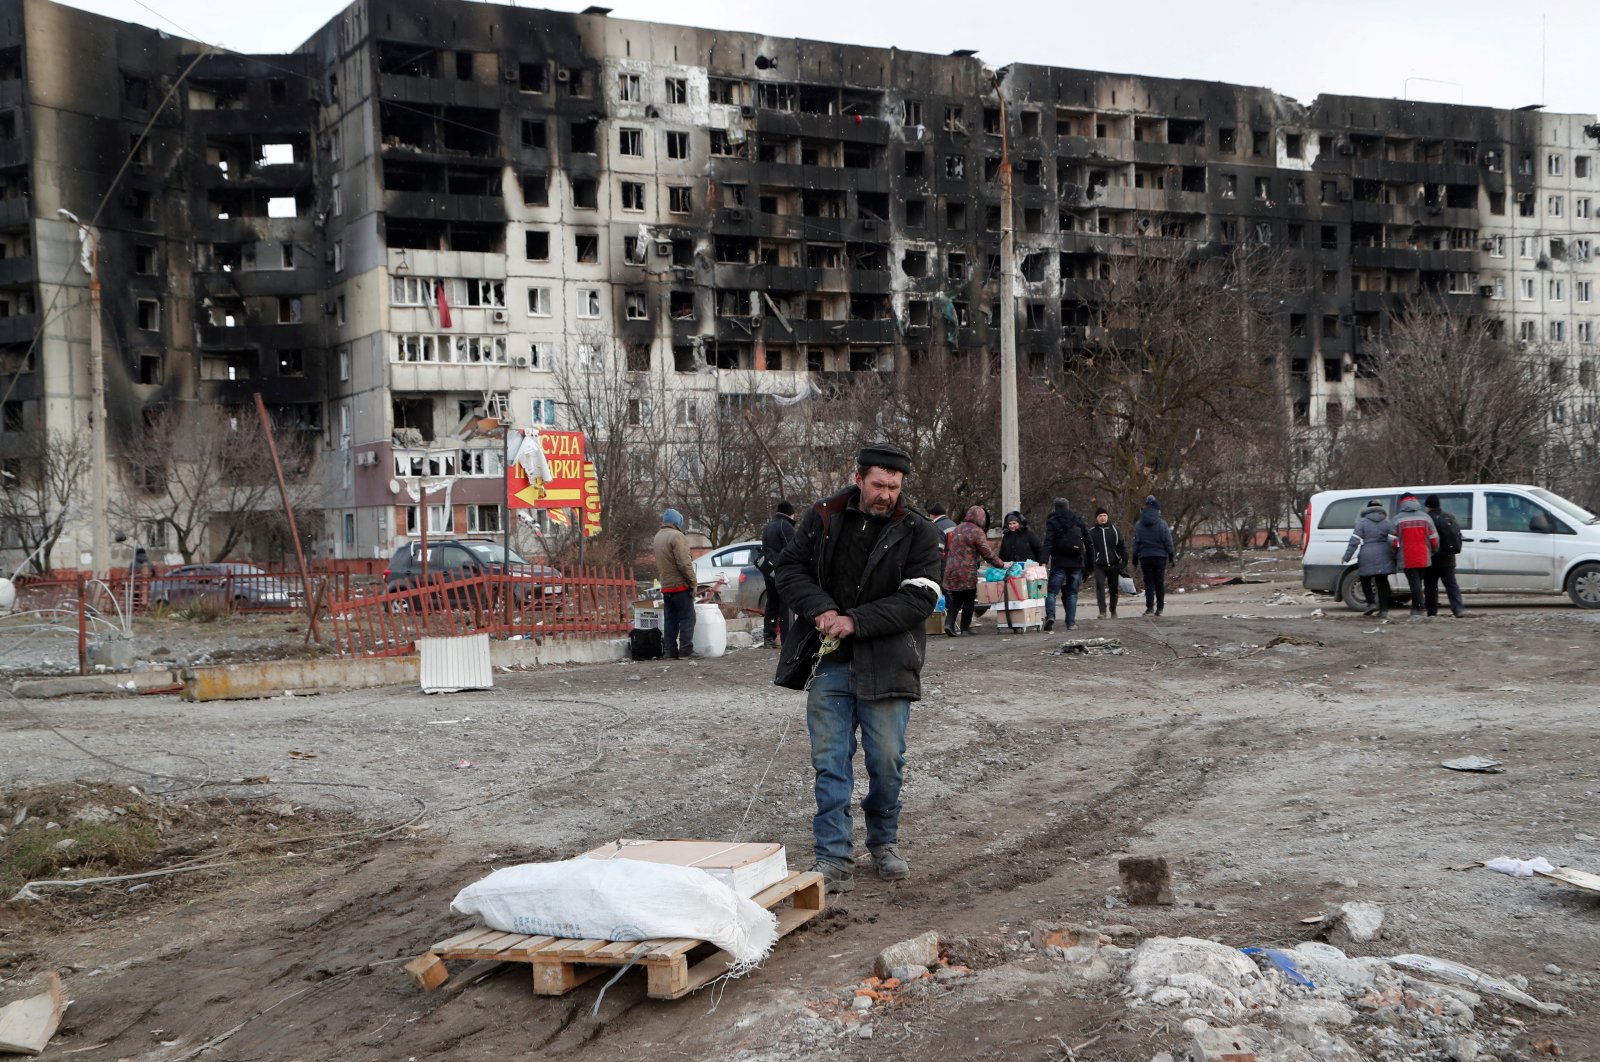 People gather near a block of flats, which was destroyed during the Russian invasion of Ukraine in the besieged southern port city of Mariupol, Ukraine, March 17, 2022. (REUTERS Photo)